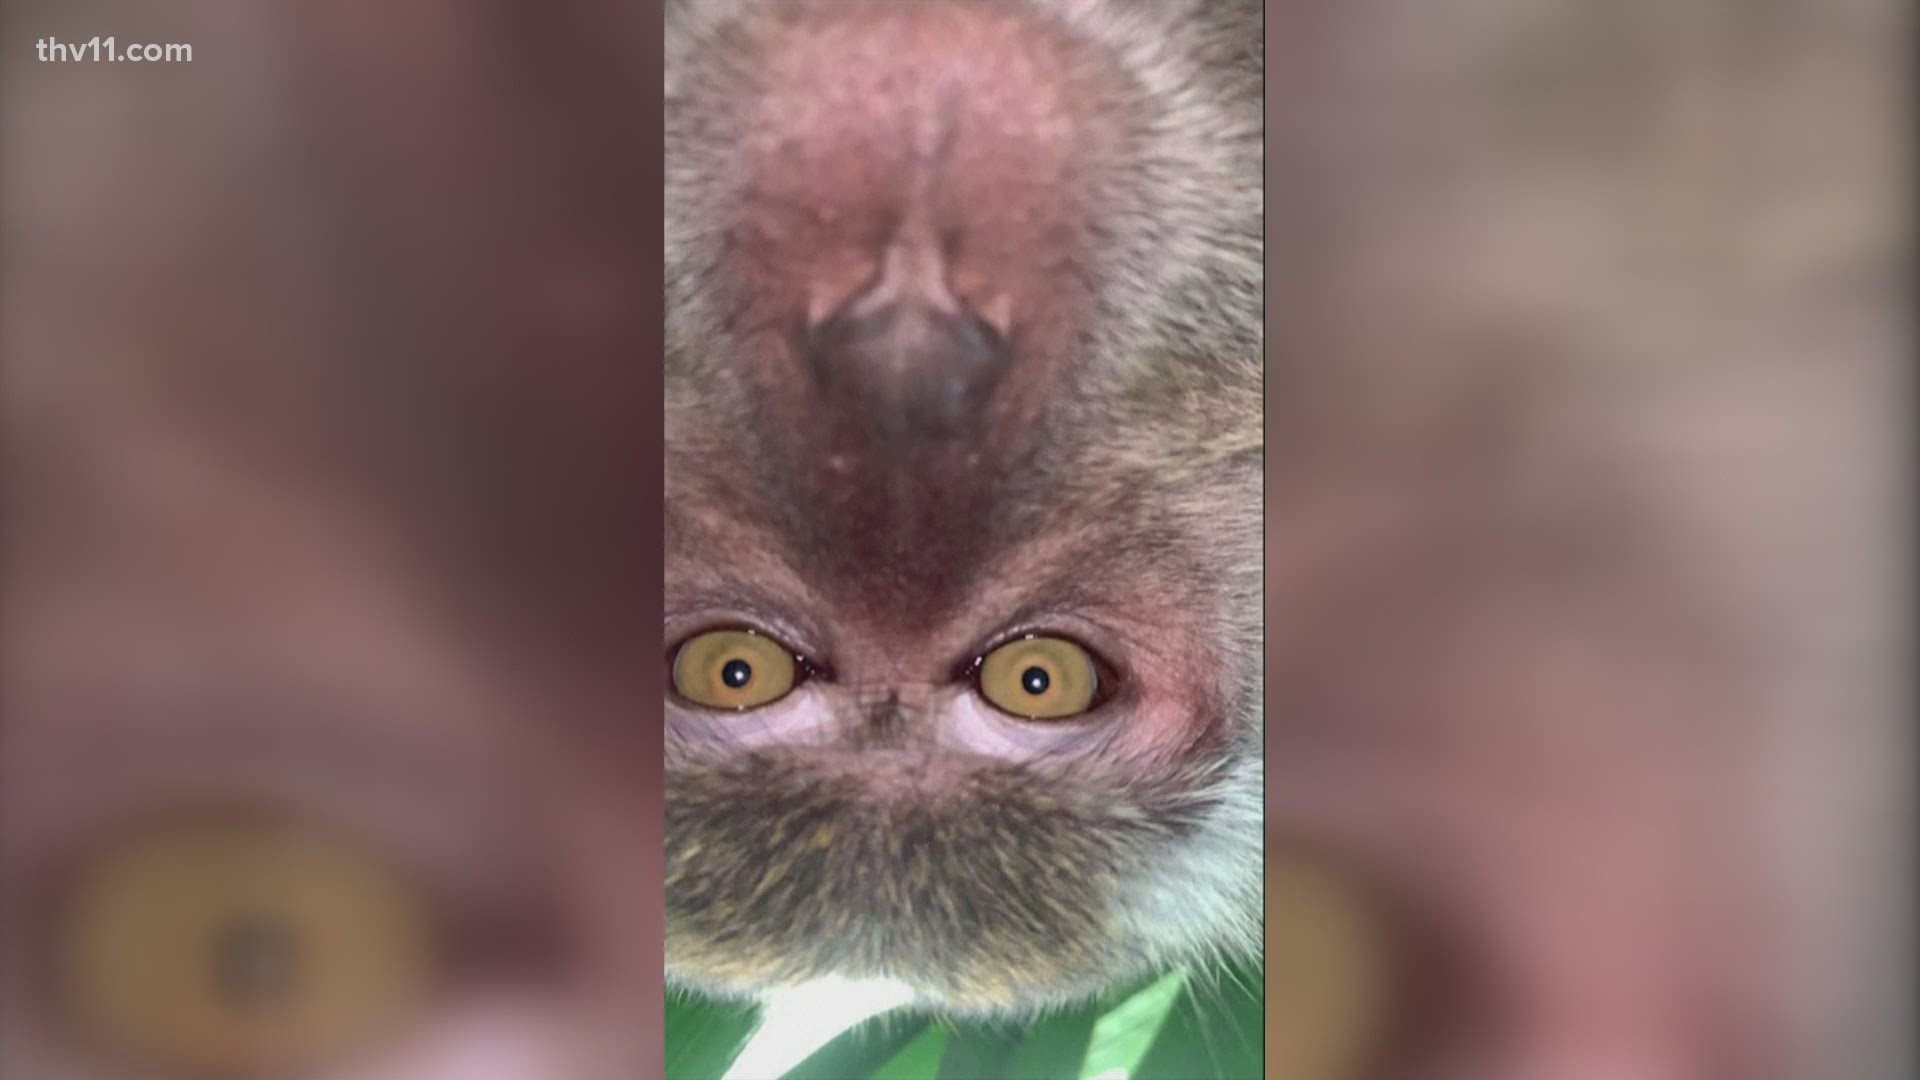 A Malaysian man found his phone with a series of photos and videos of a monkey.